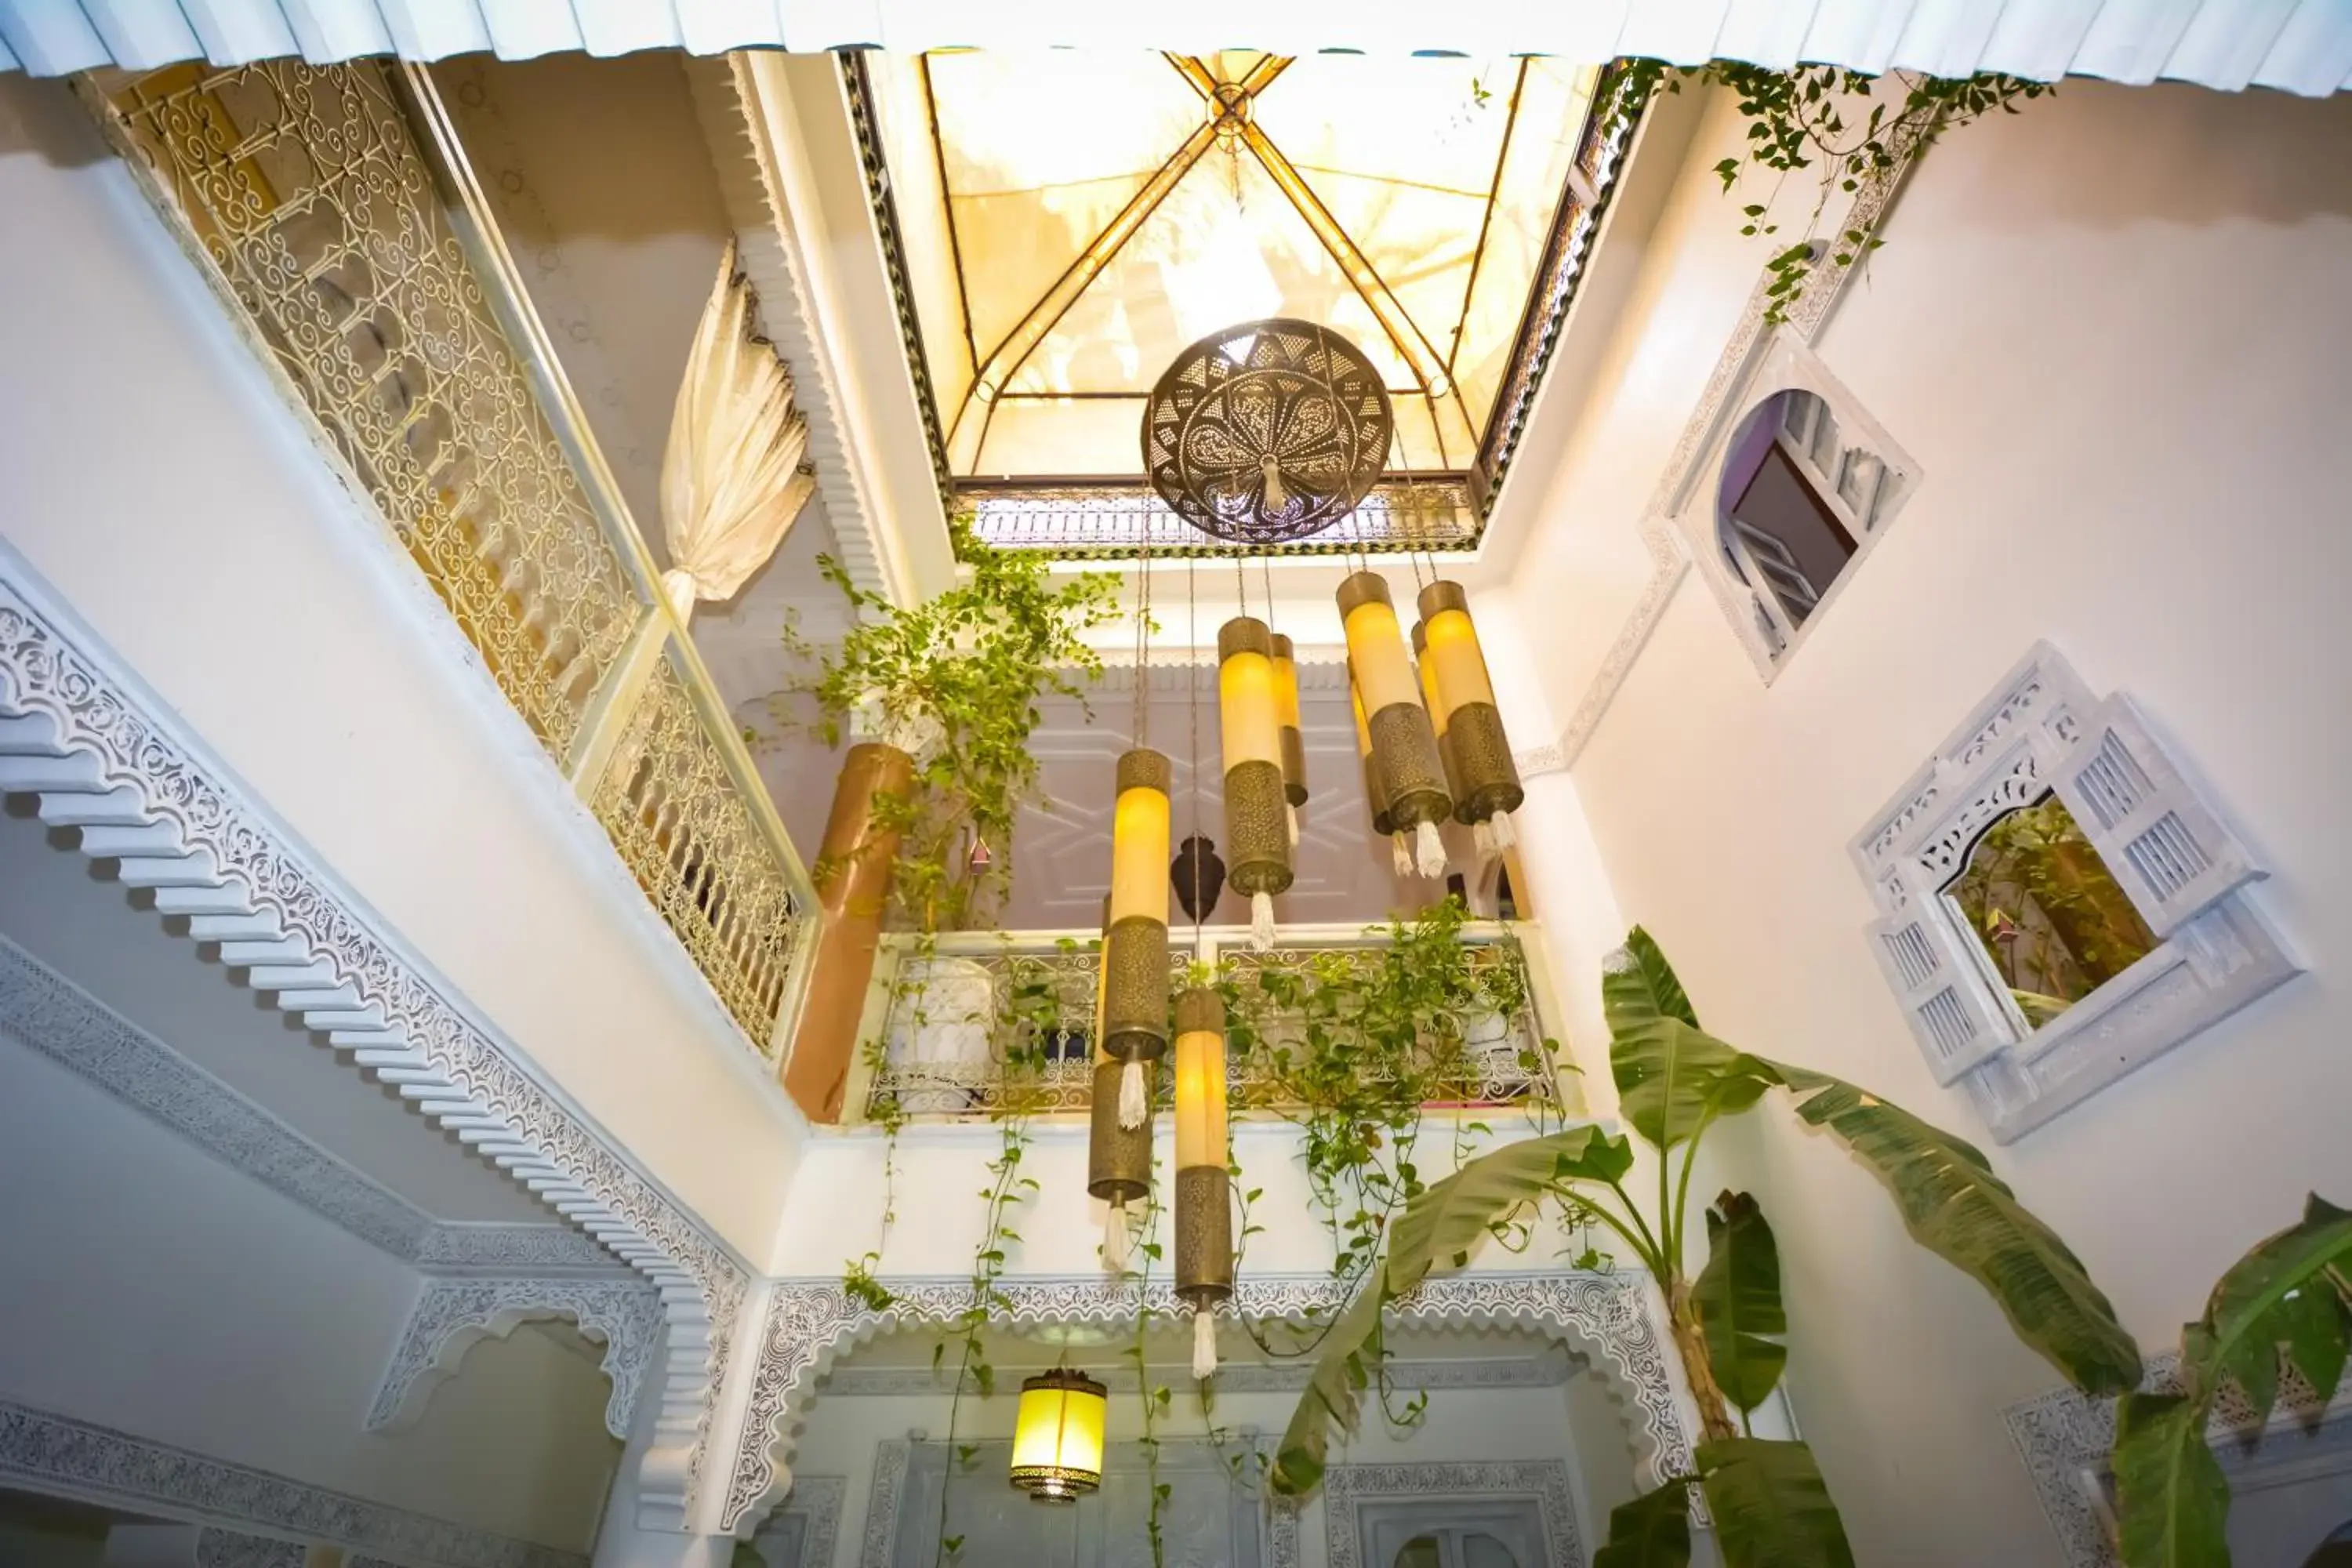 View (from property/room) in Riad Eloise